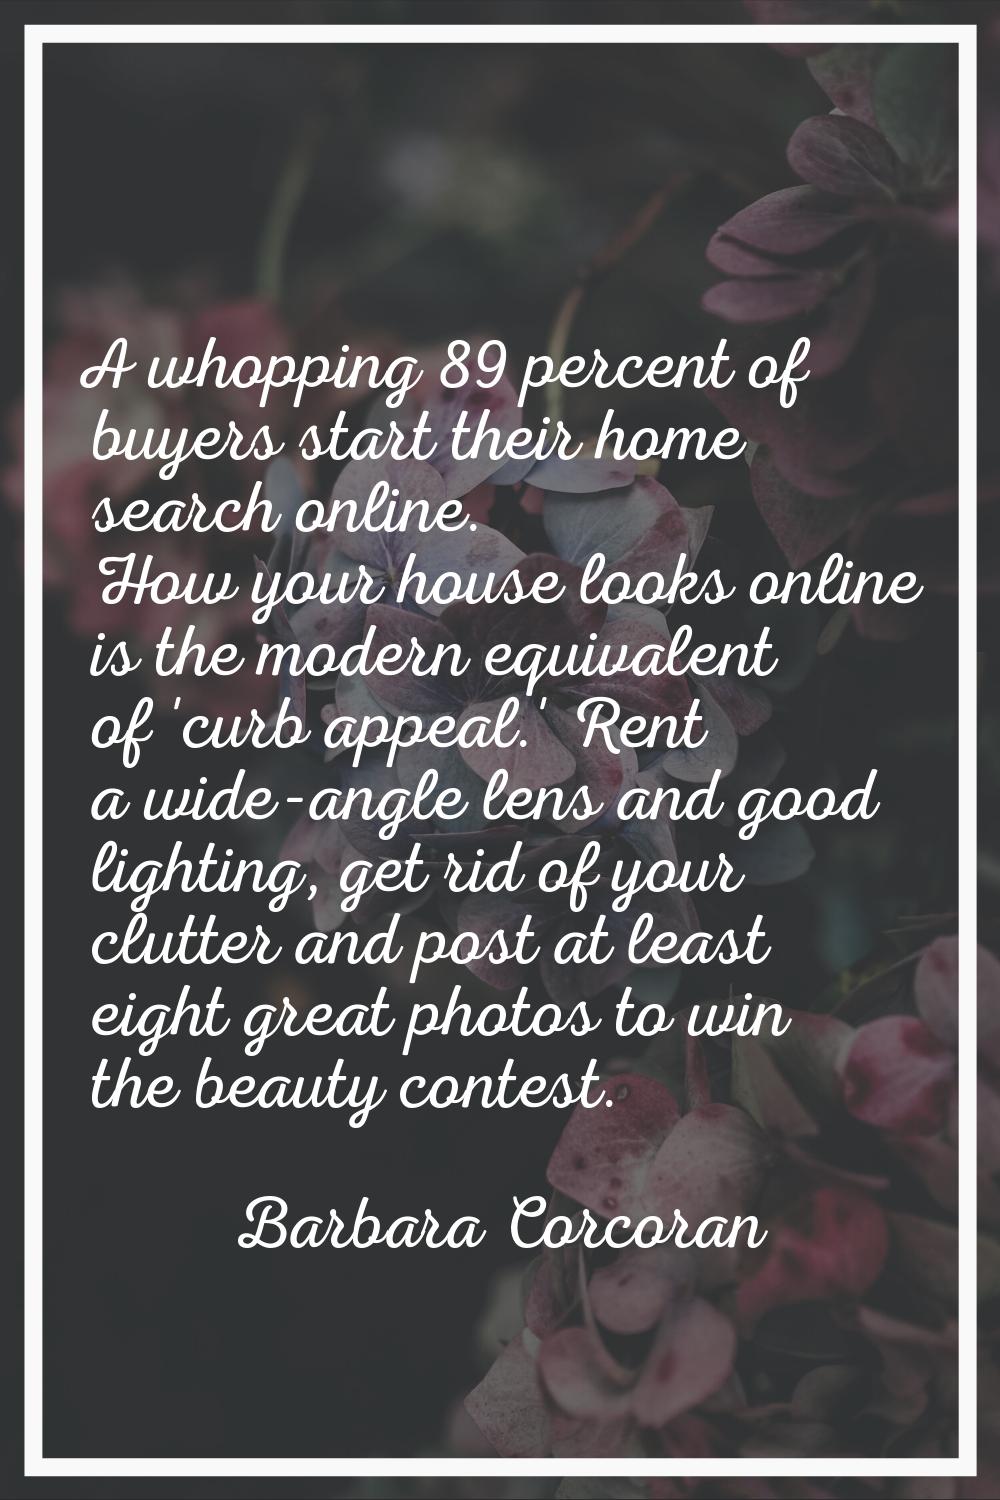 A whopping 89 percent of buyers start their home search online. How your house looks online is the 